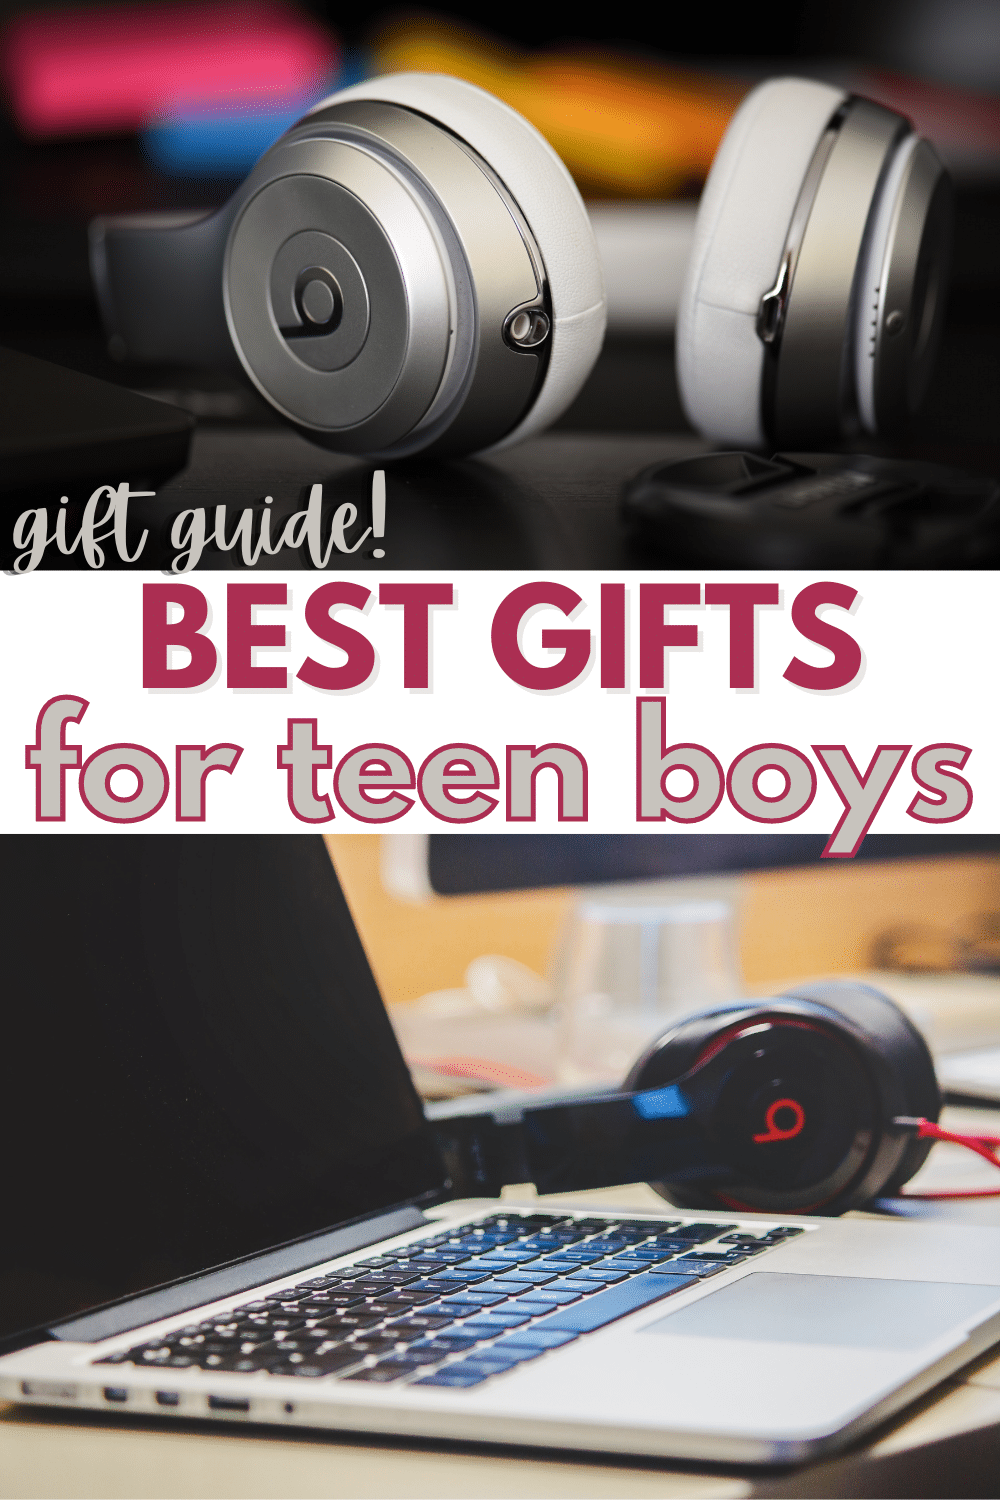 Teen boys are hard to shop for since they've outgrown most toys & they have expensive interests. Here are some affordable best gifts for teen boys. #giftguide #giftideas #forhim #teenboys via @wondermomwannab